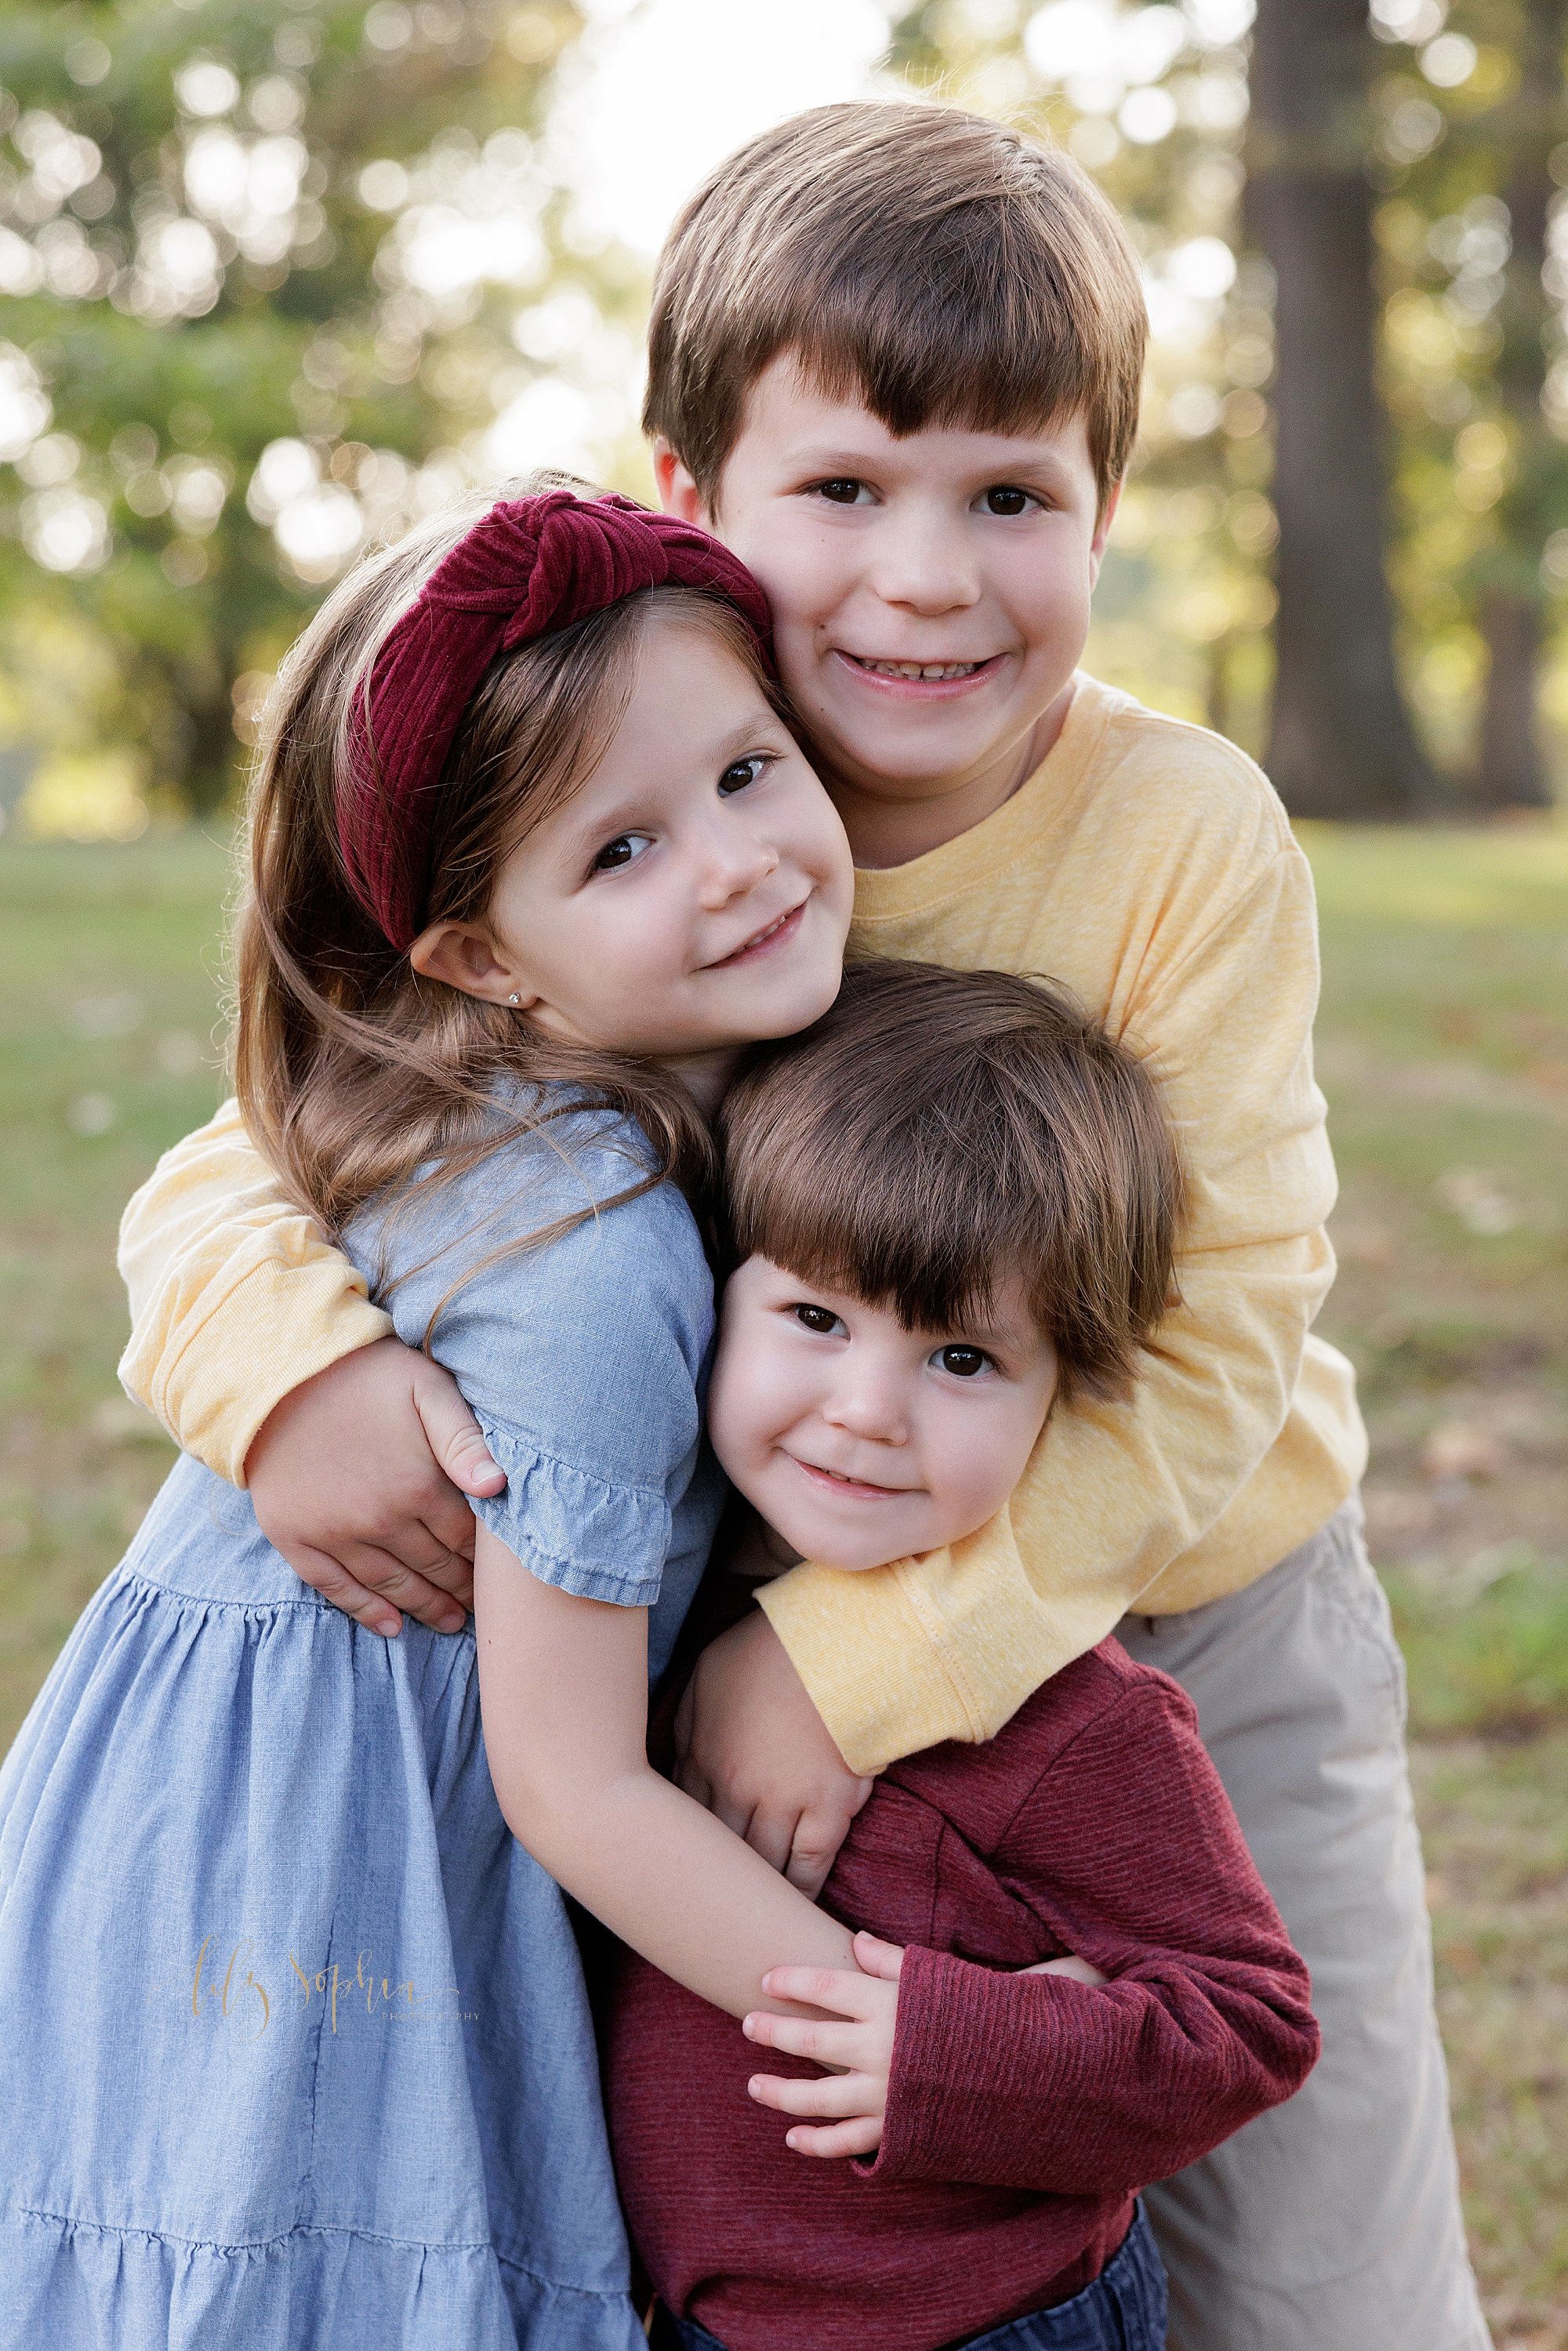  Sibling group hug is captured in a park near Atlanta, Georgia for a family photography session at sunset during the spring season. 